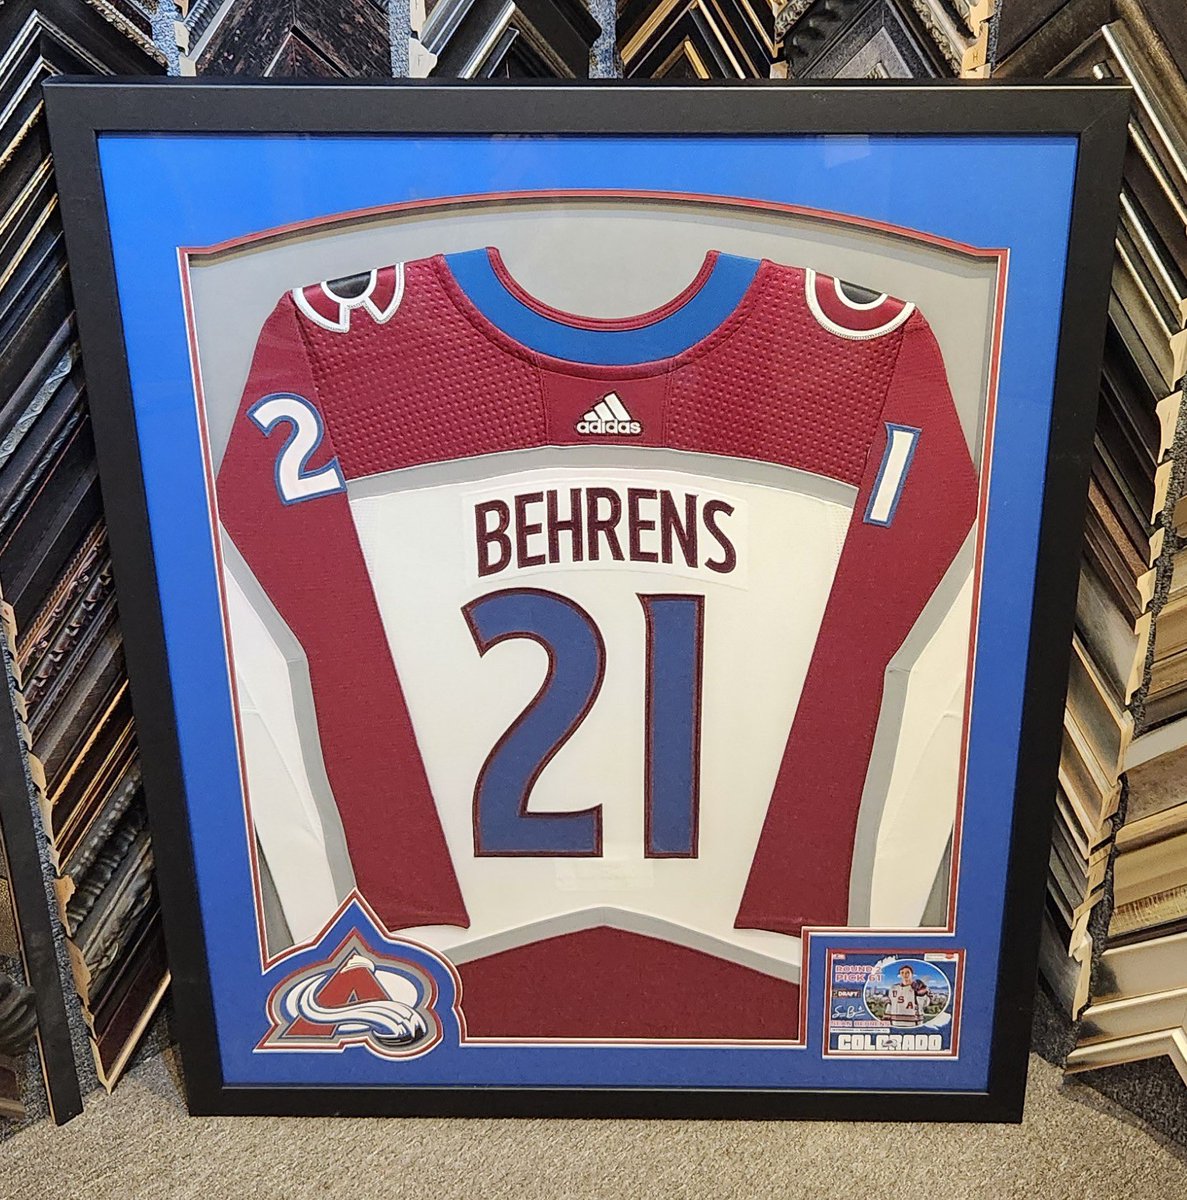 Good luck Colorado Avalanche!  Congratulations DU Hockey National Champion Sean Behrens signing with the Colorado Avalanche!  We were honored to frame his jersey for his family!
#ColoradoAvalanche #Avalanche #DUHockey #NationalChampions #Denver #Colorado #framing #customframing